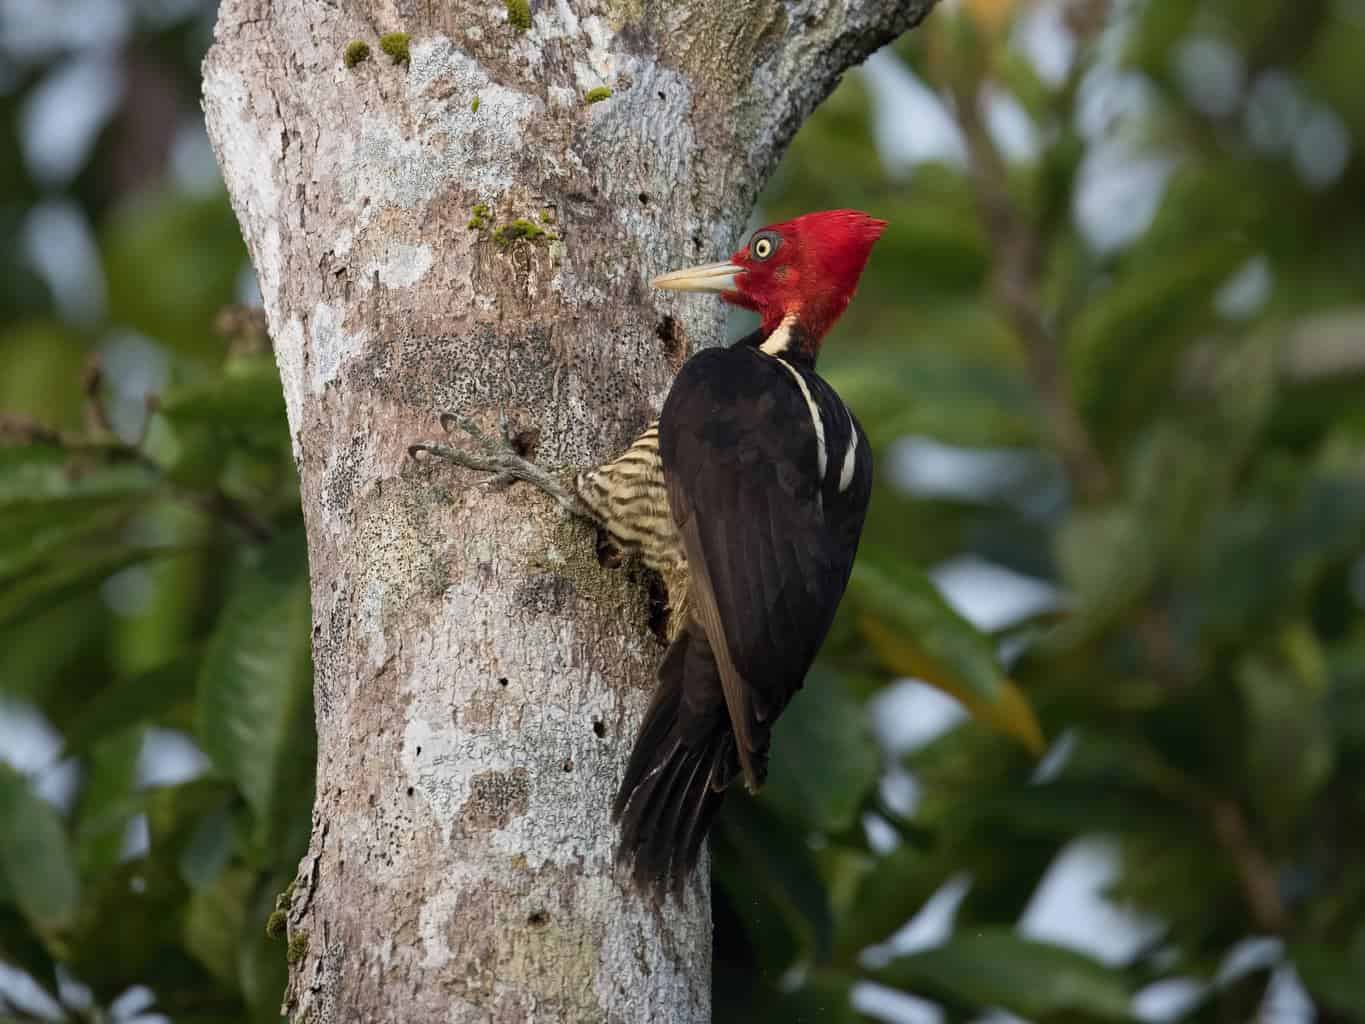 ivory billed woodpecker perched in the tree in florida